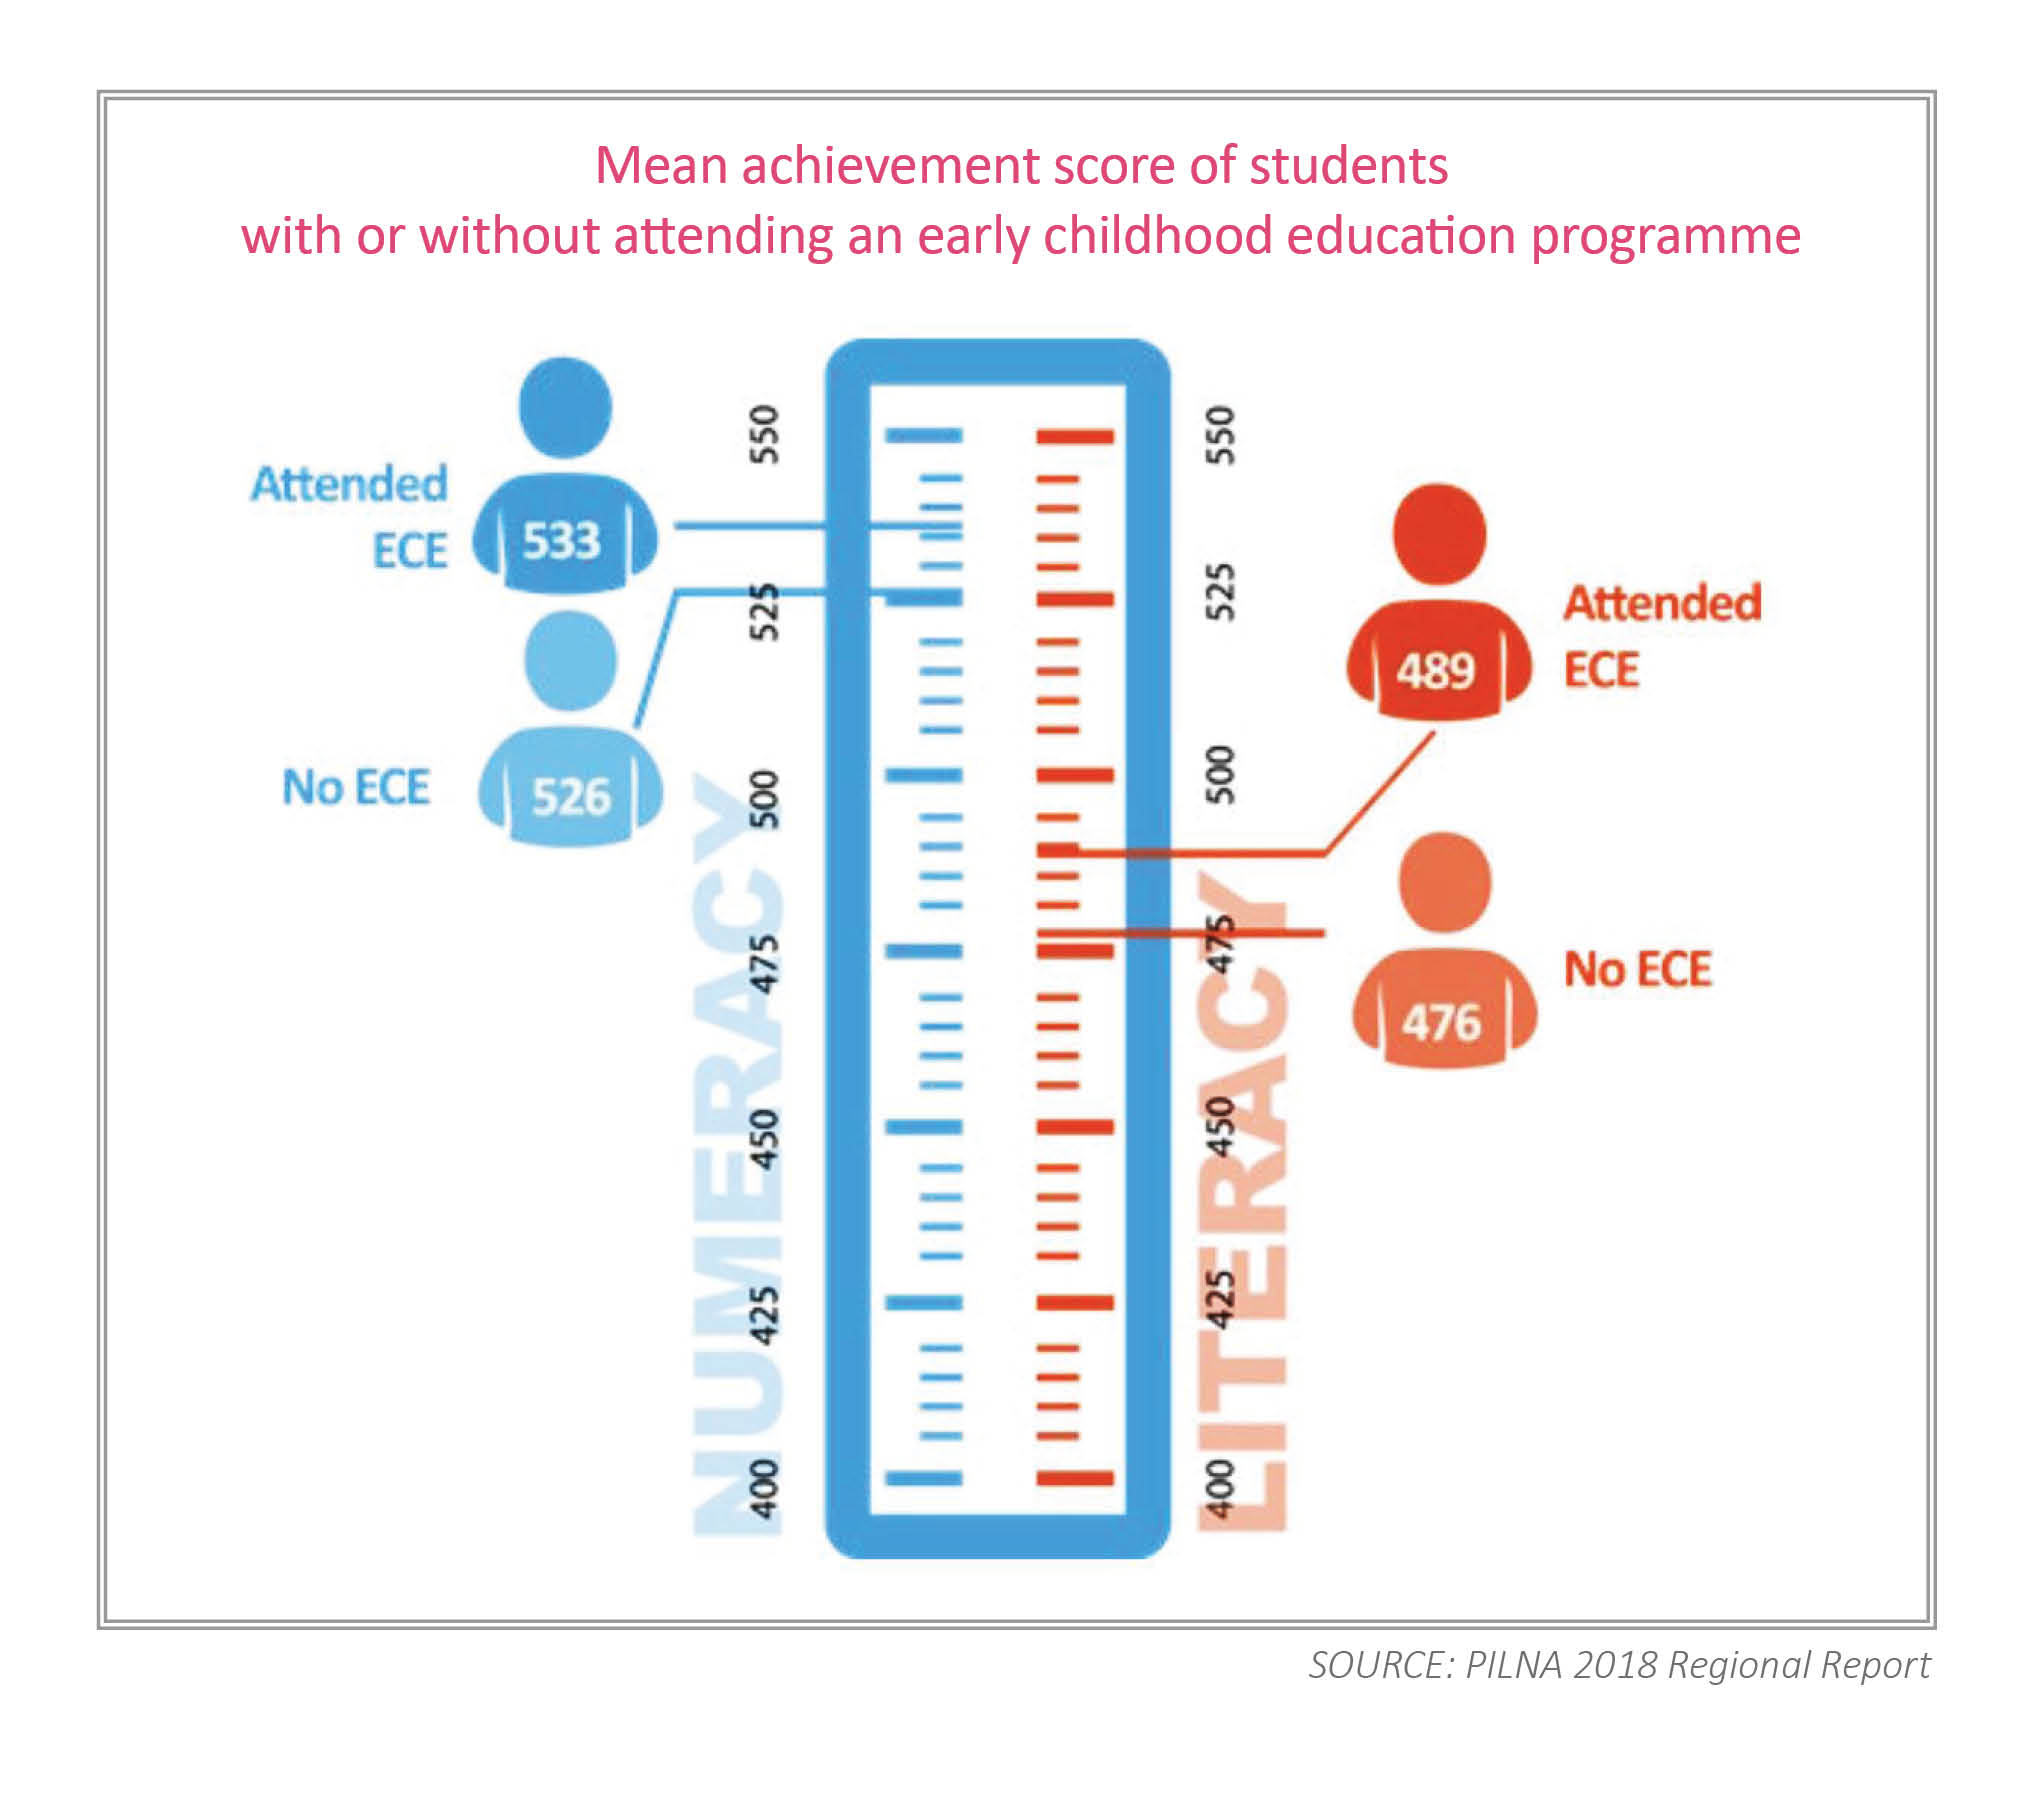 Mean achievement score of students with or without attending an early childhood education programme